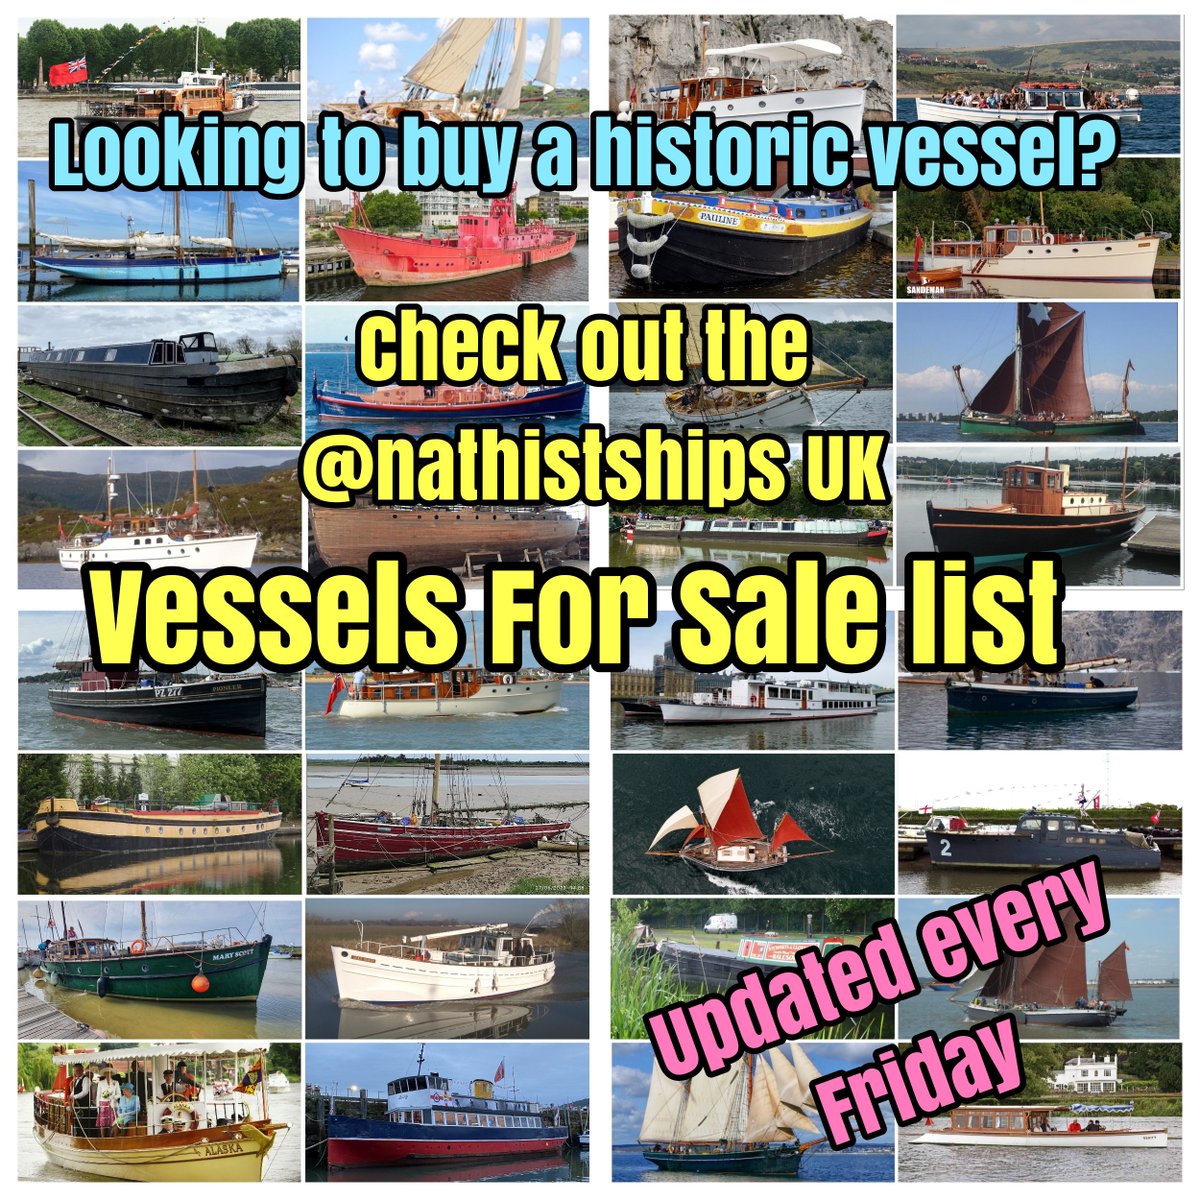 Looking to buy a historic vessel for restoration, for leisure, to liveaboard, or to operate as a business? Check out the @NatHistShips UK Vessels For Sale list, updated every Friday: tinyurl.com/vesselsforsale